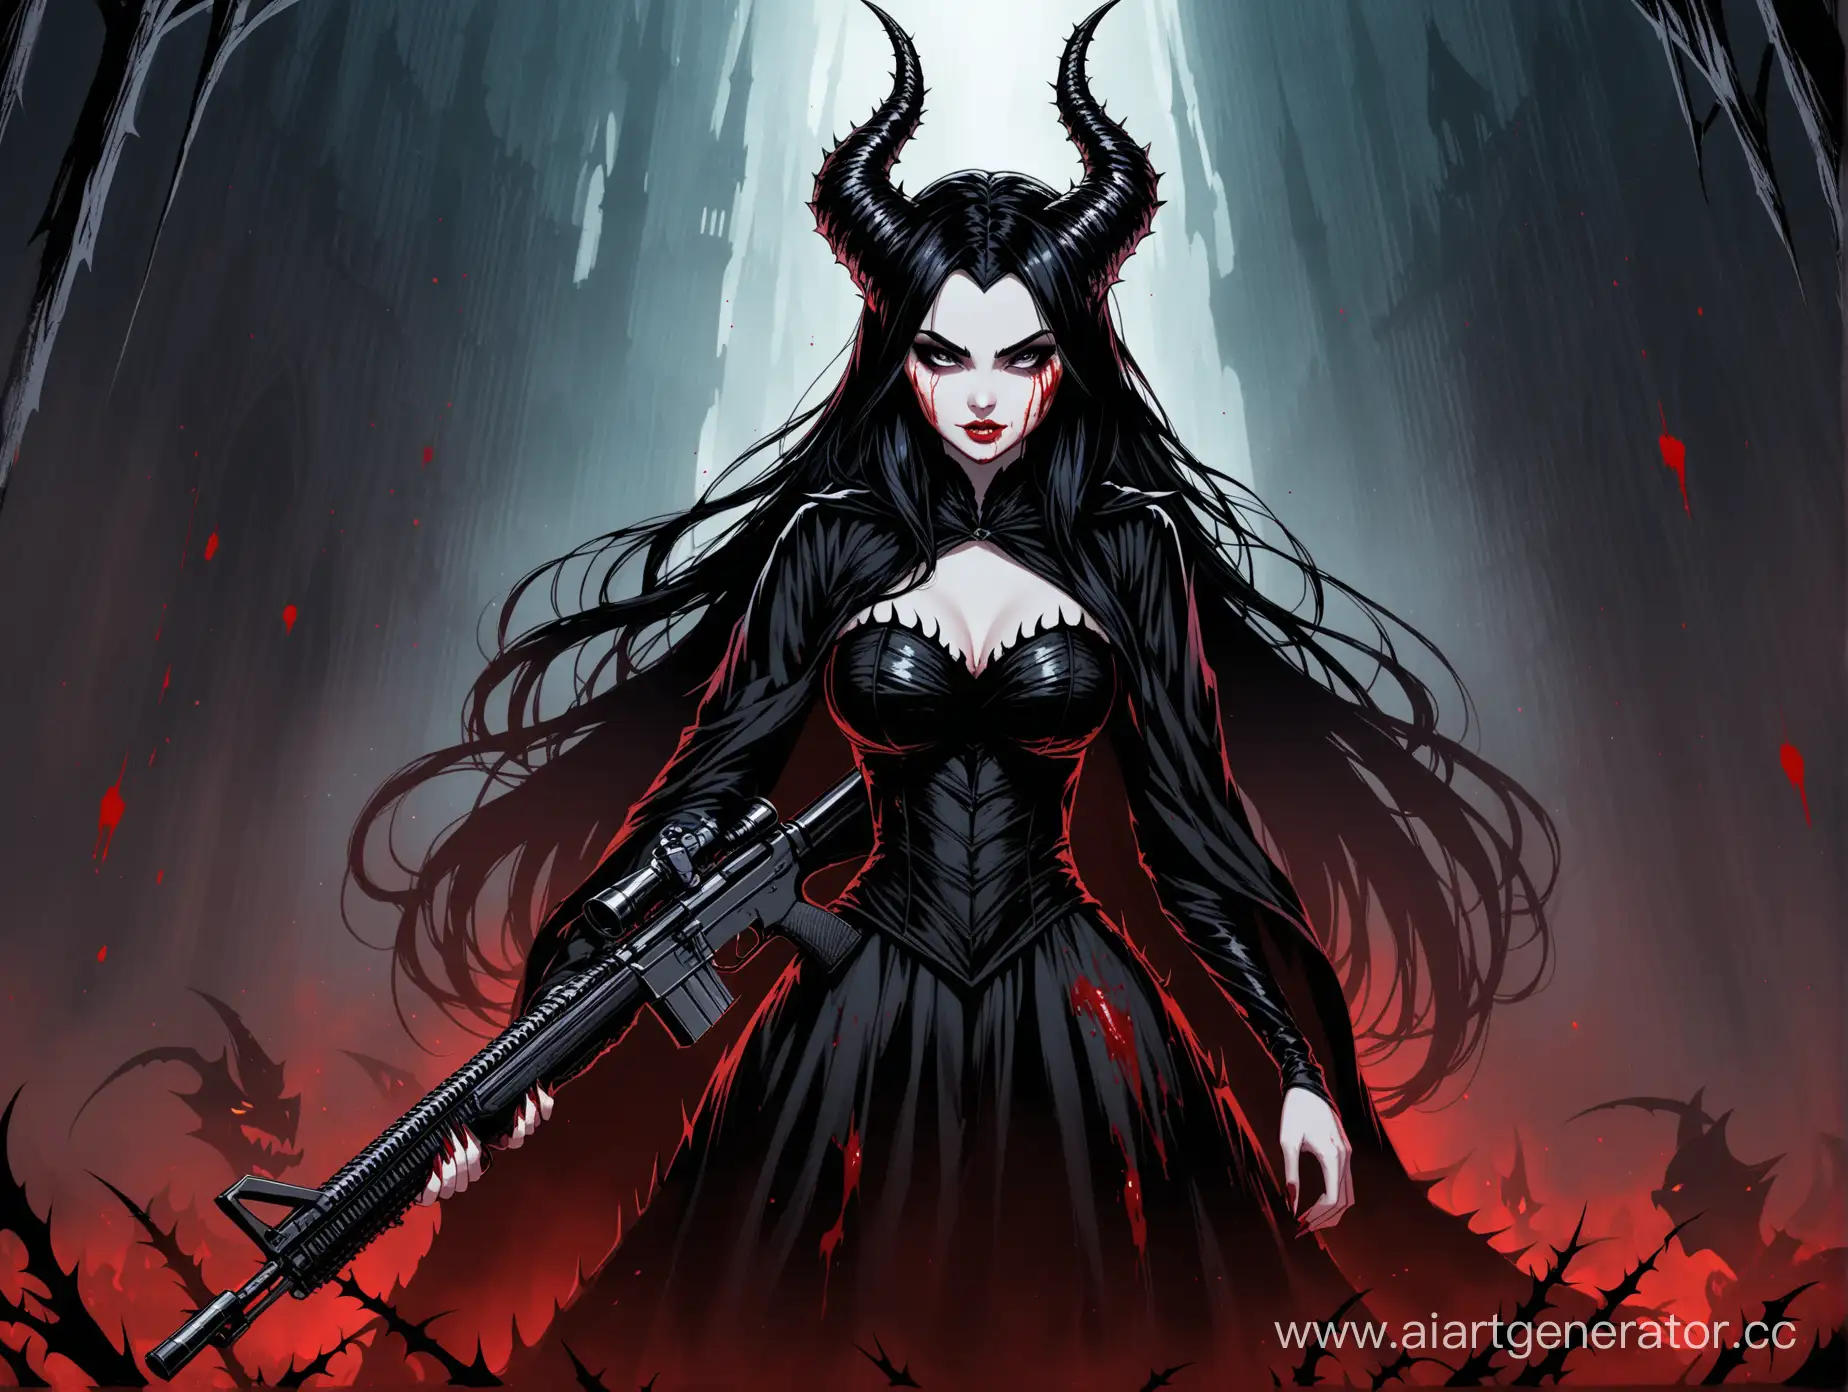 Dark-Fantasy-Warrior-with-Horns-and-Thorny-Mask-Wielding-a-BloodStained-Rifle